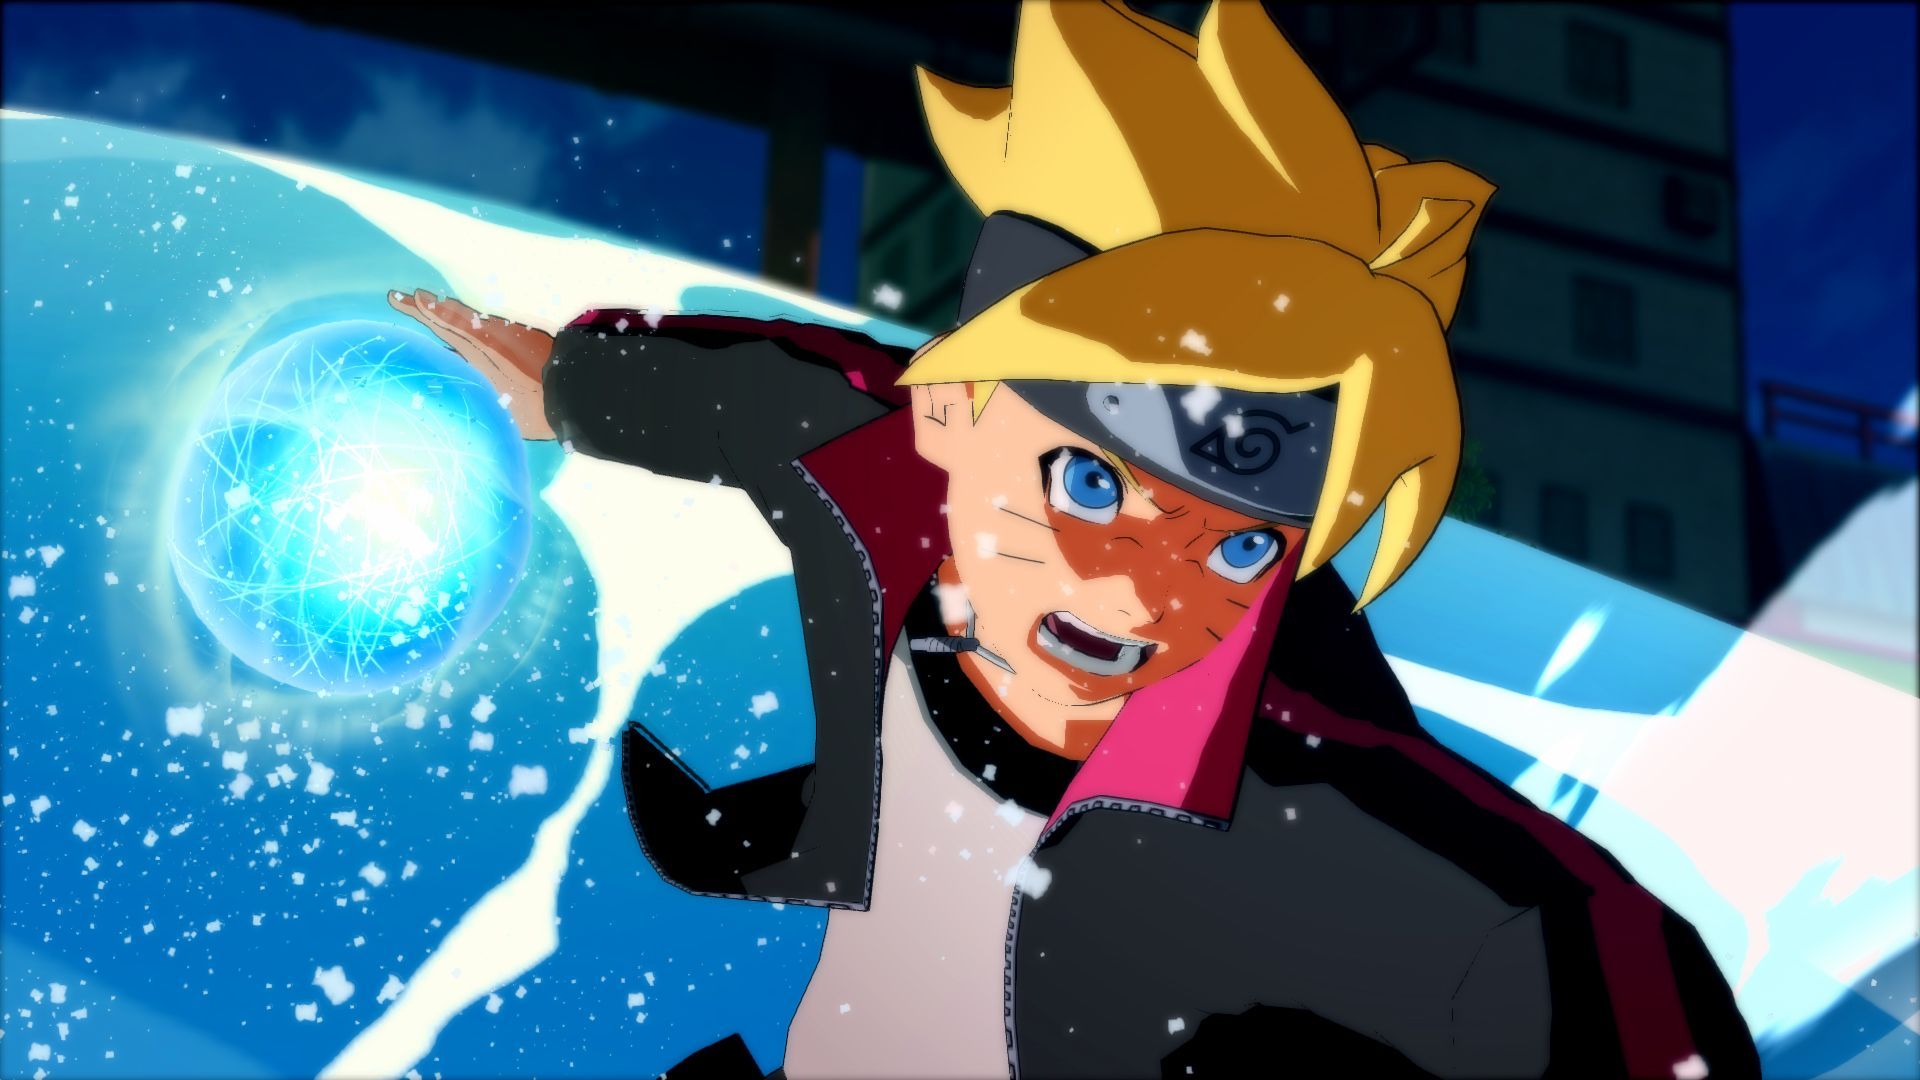 The Road to Boruto Expansion is coming to NARUTO SHIPPUDEN